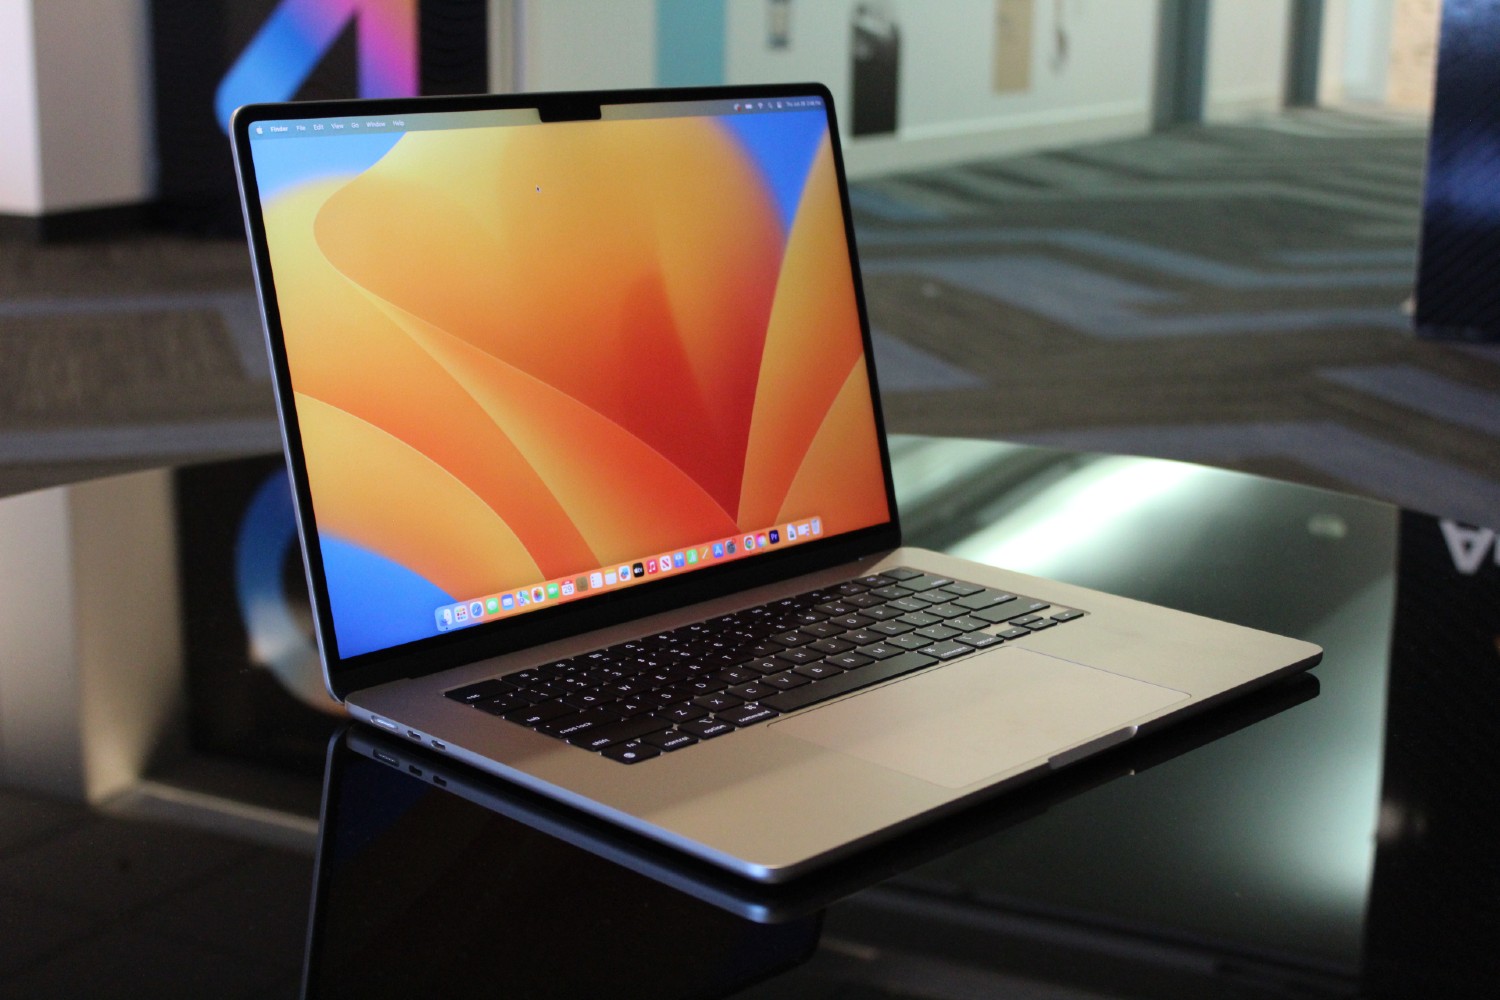 5 laptops you should buy instead of the Dell XPS 14